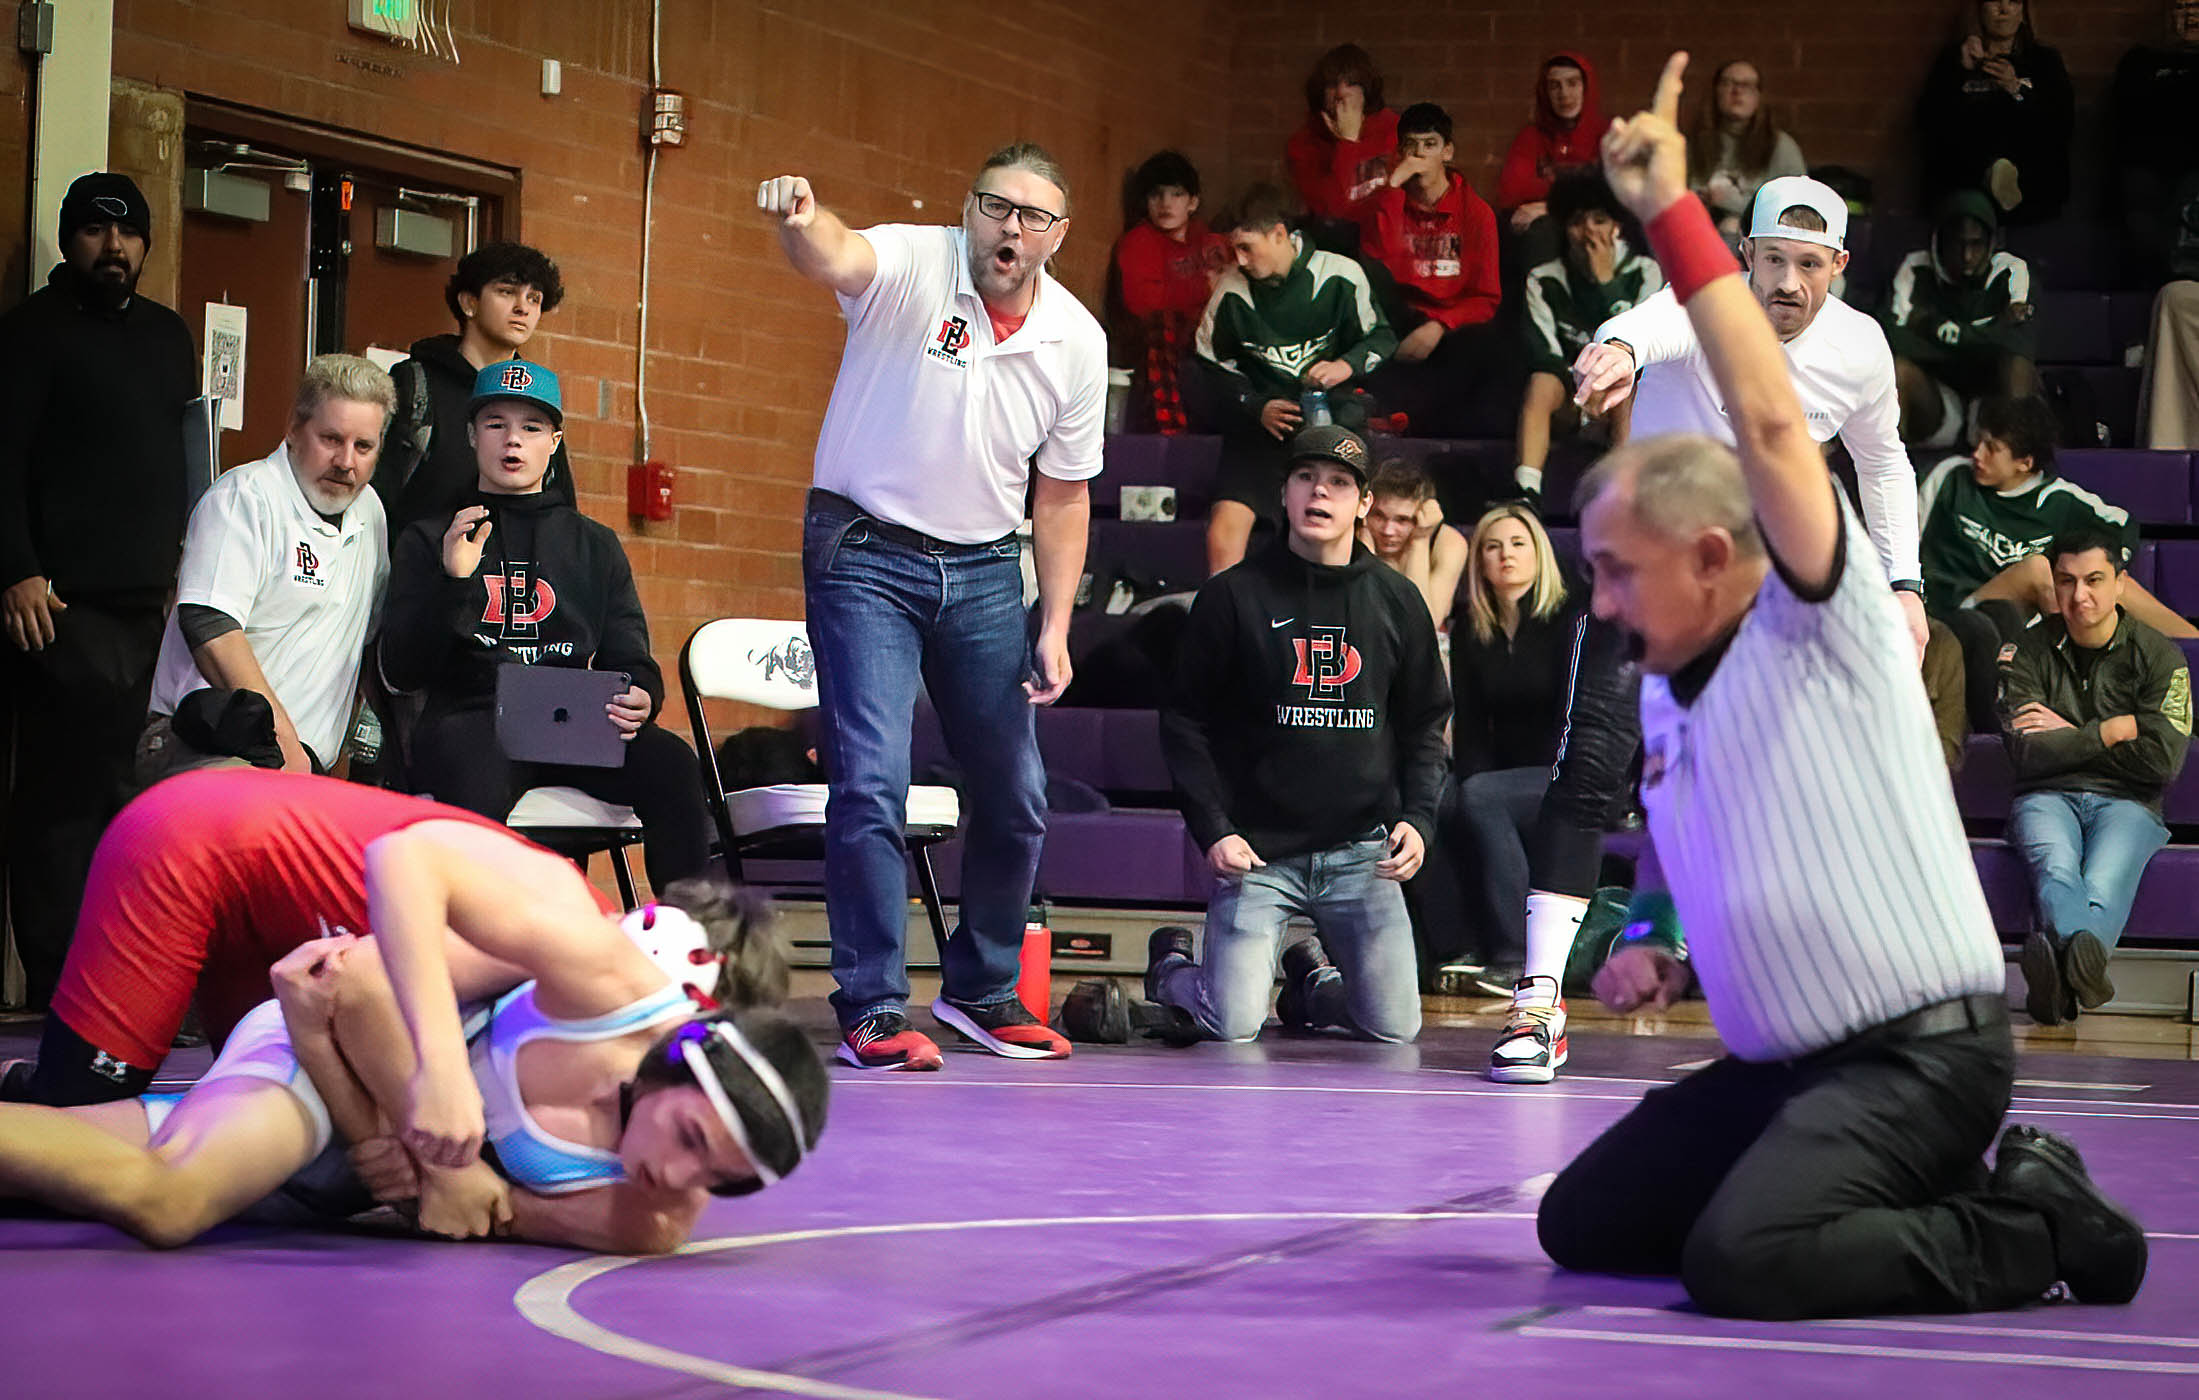 The Dolores coach shouts some strong encouragement to Kenji Edward during his 120 lb. bout against Trinidad’s Damien Ossola. Ossola pinned his opponent at 2:25 in the match.